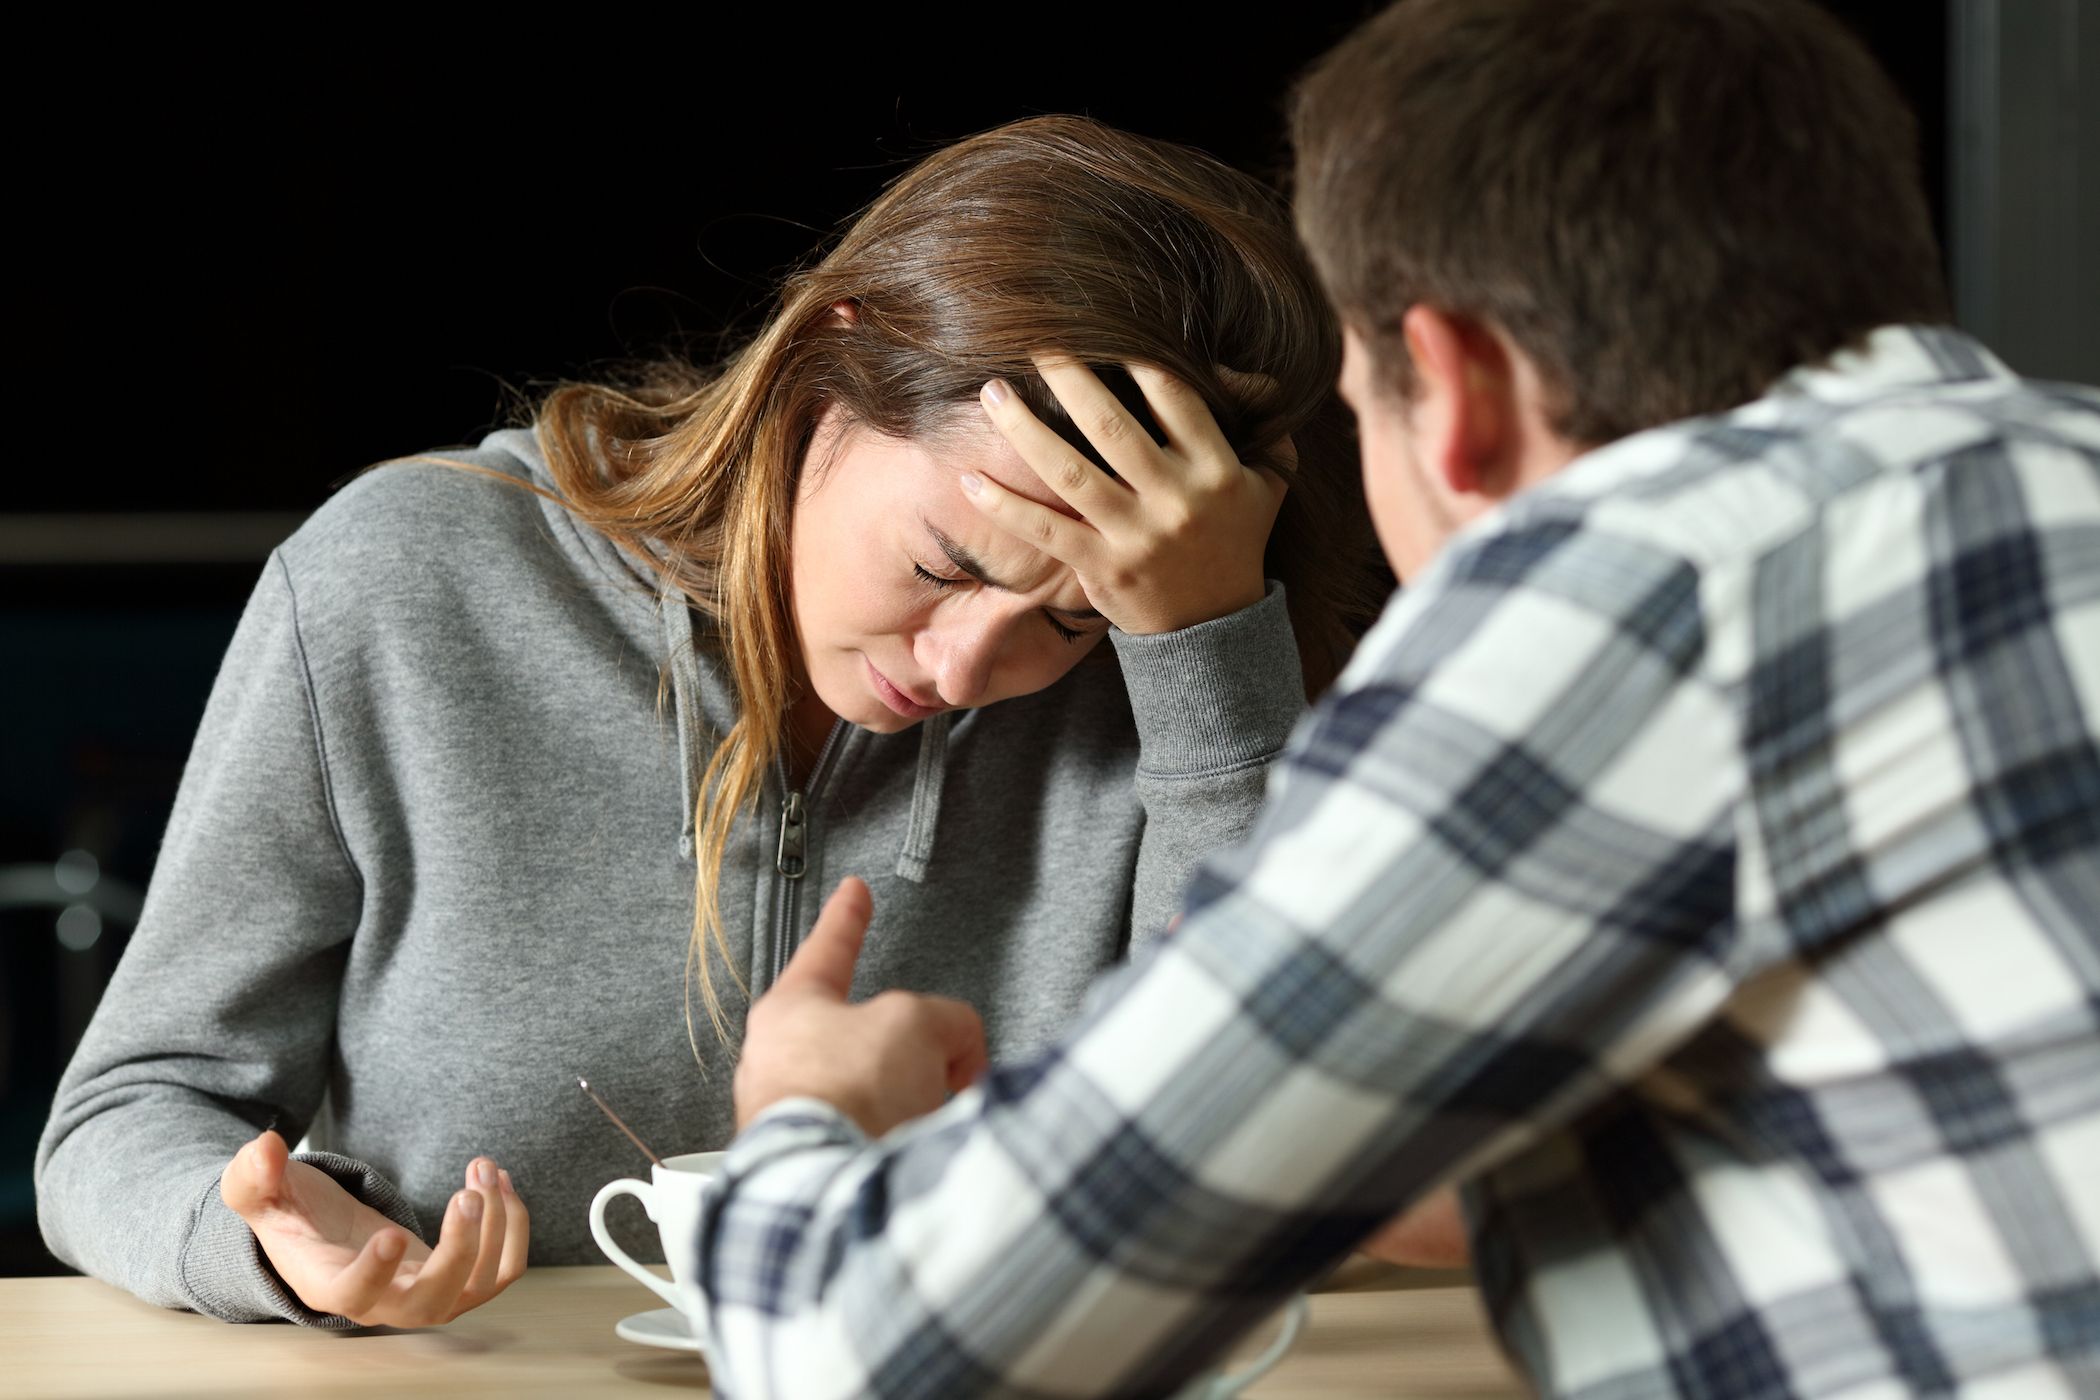 15 Warning Signs of Divorce - Marriage Traits That Lead to Divorce